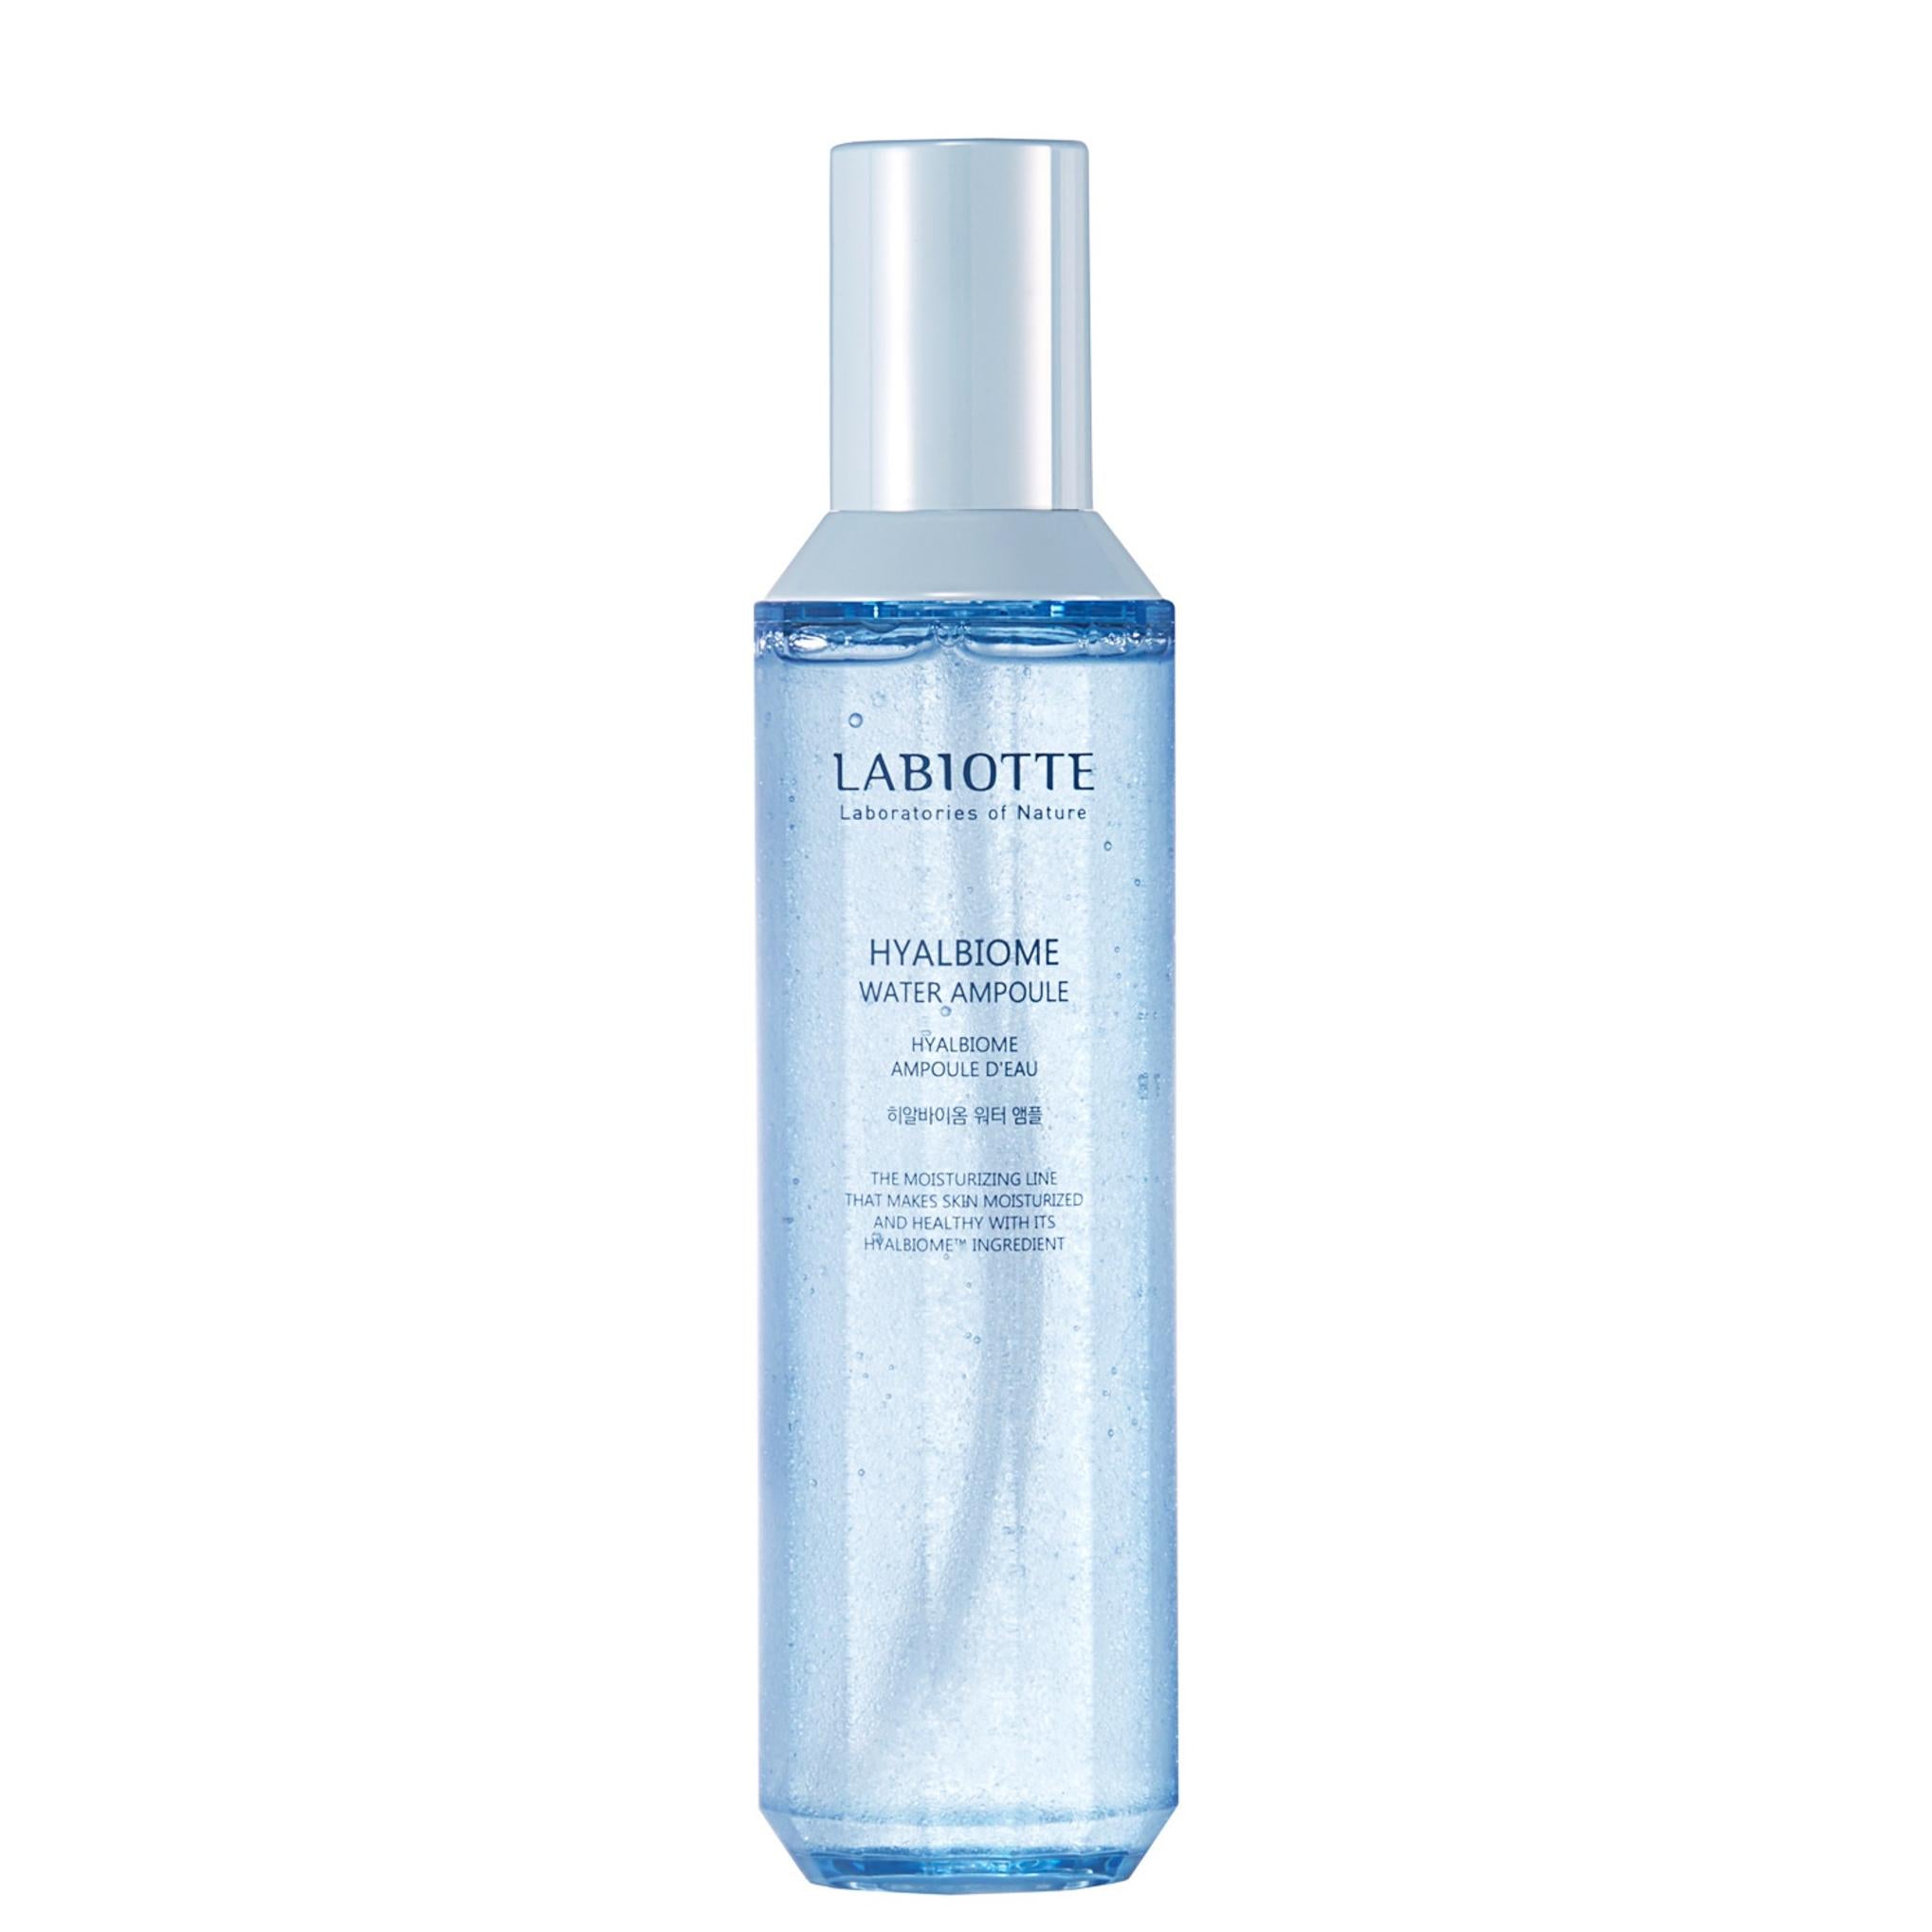 Labiotte Hyalbiome Water Ampoule